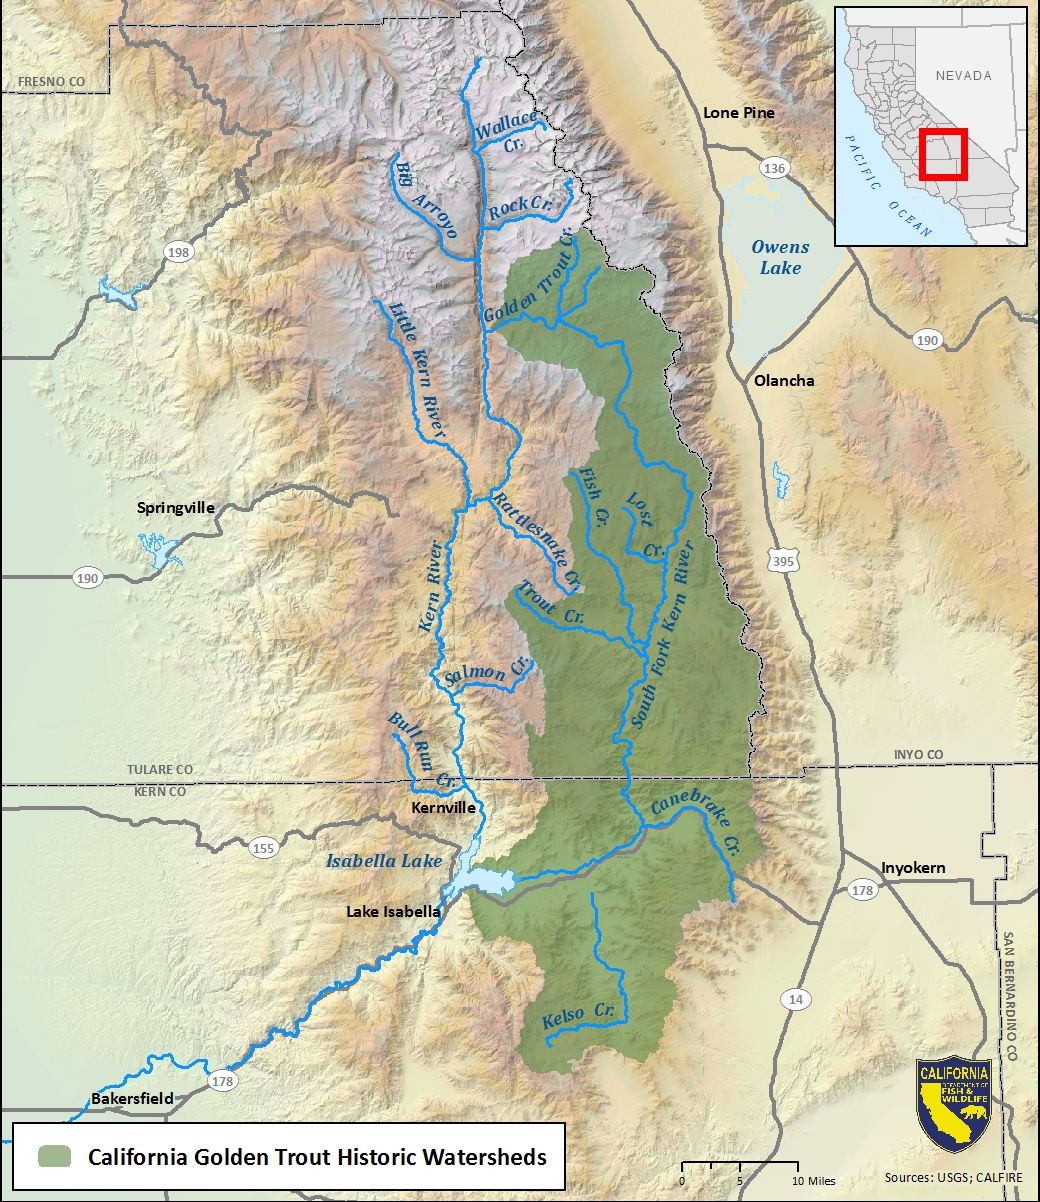 Map of California golden trout historic watersheds - click to enlarge in new window